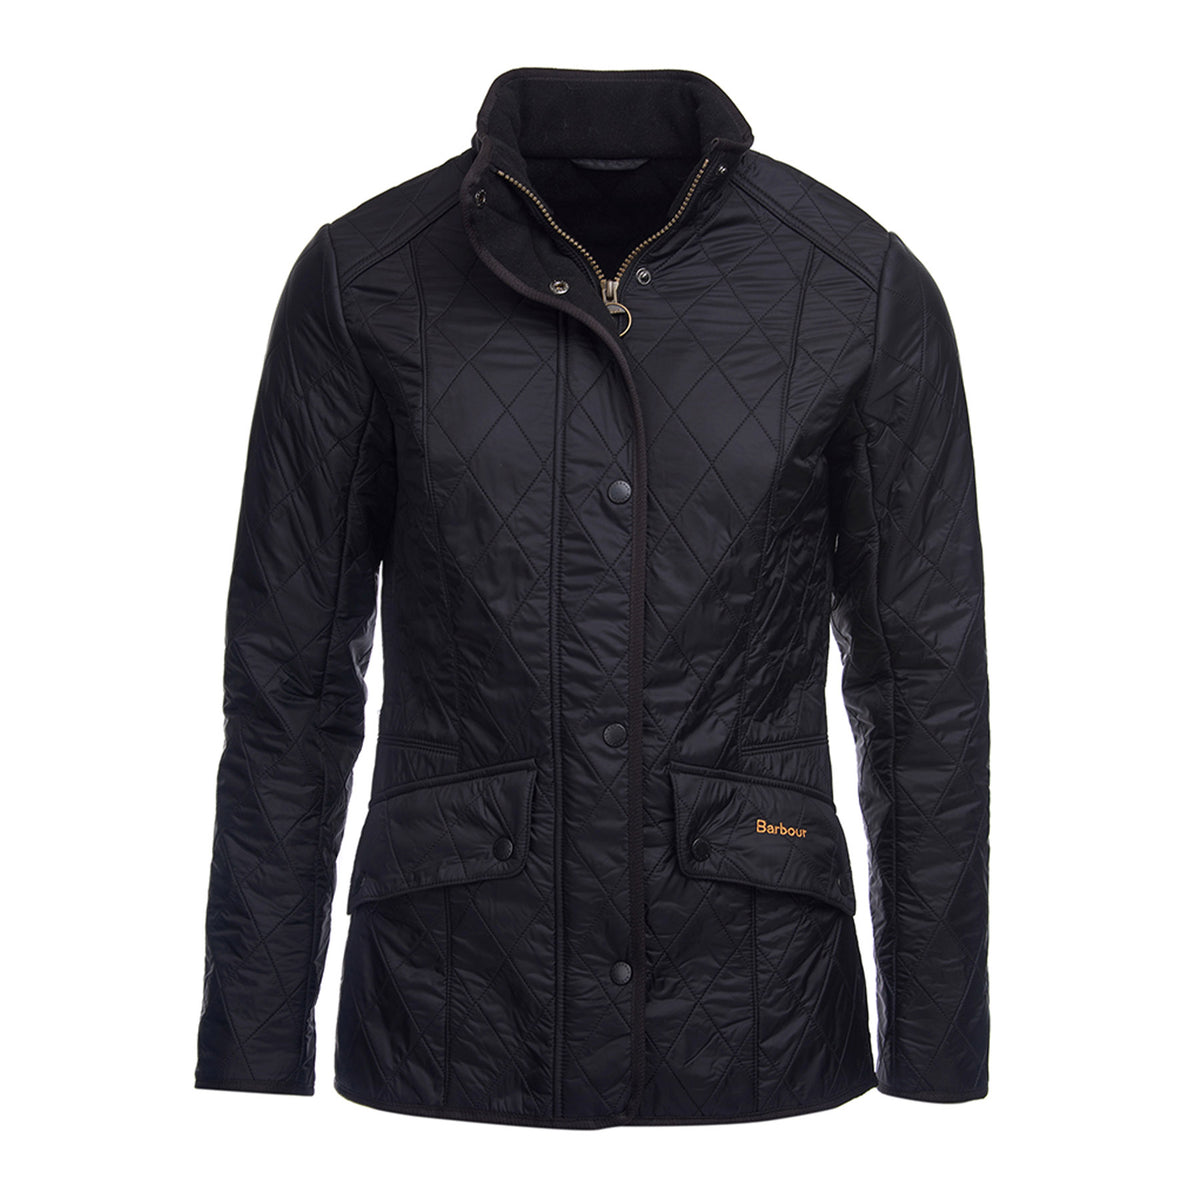 Hero image featuring the front of the Barbour Cavalry Polar Quilt jacket in black.